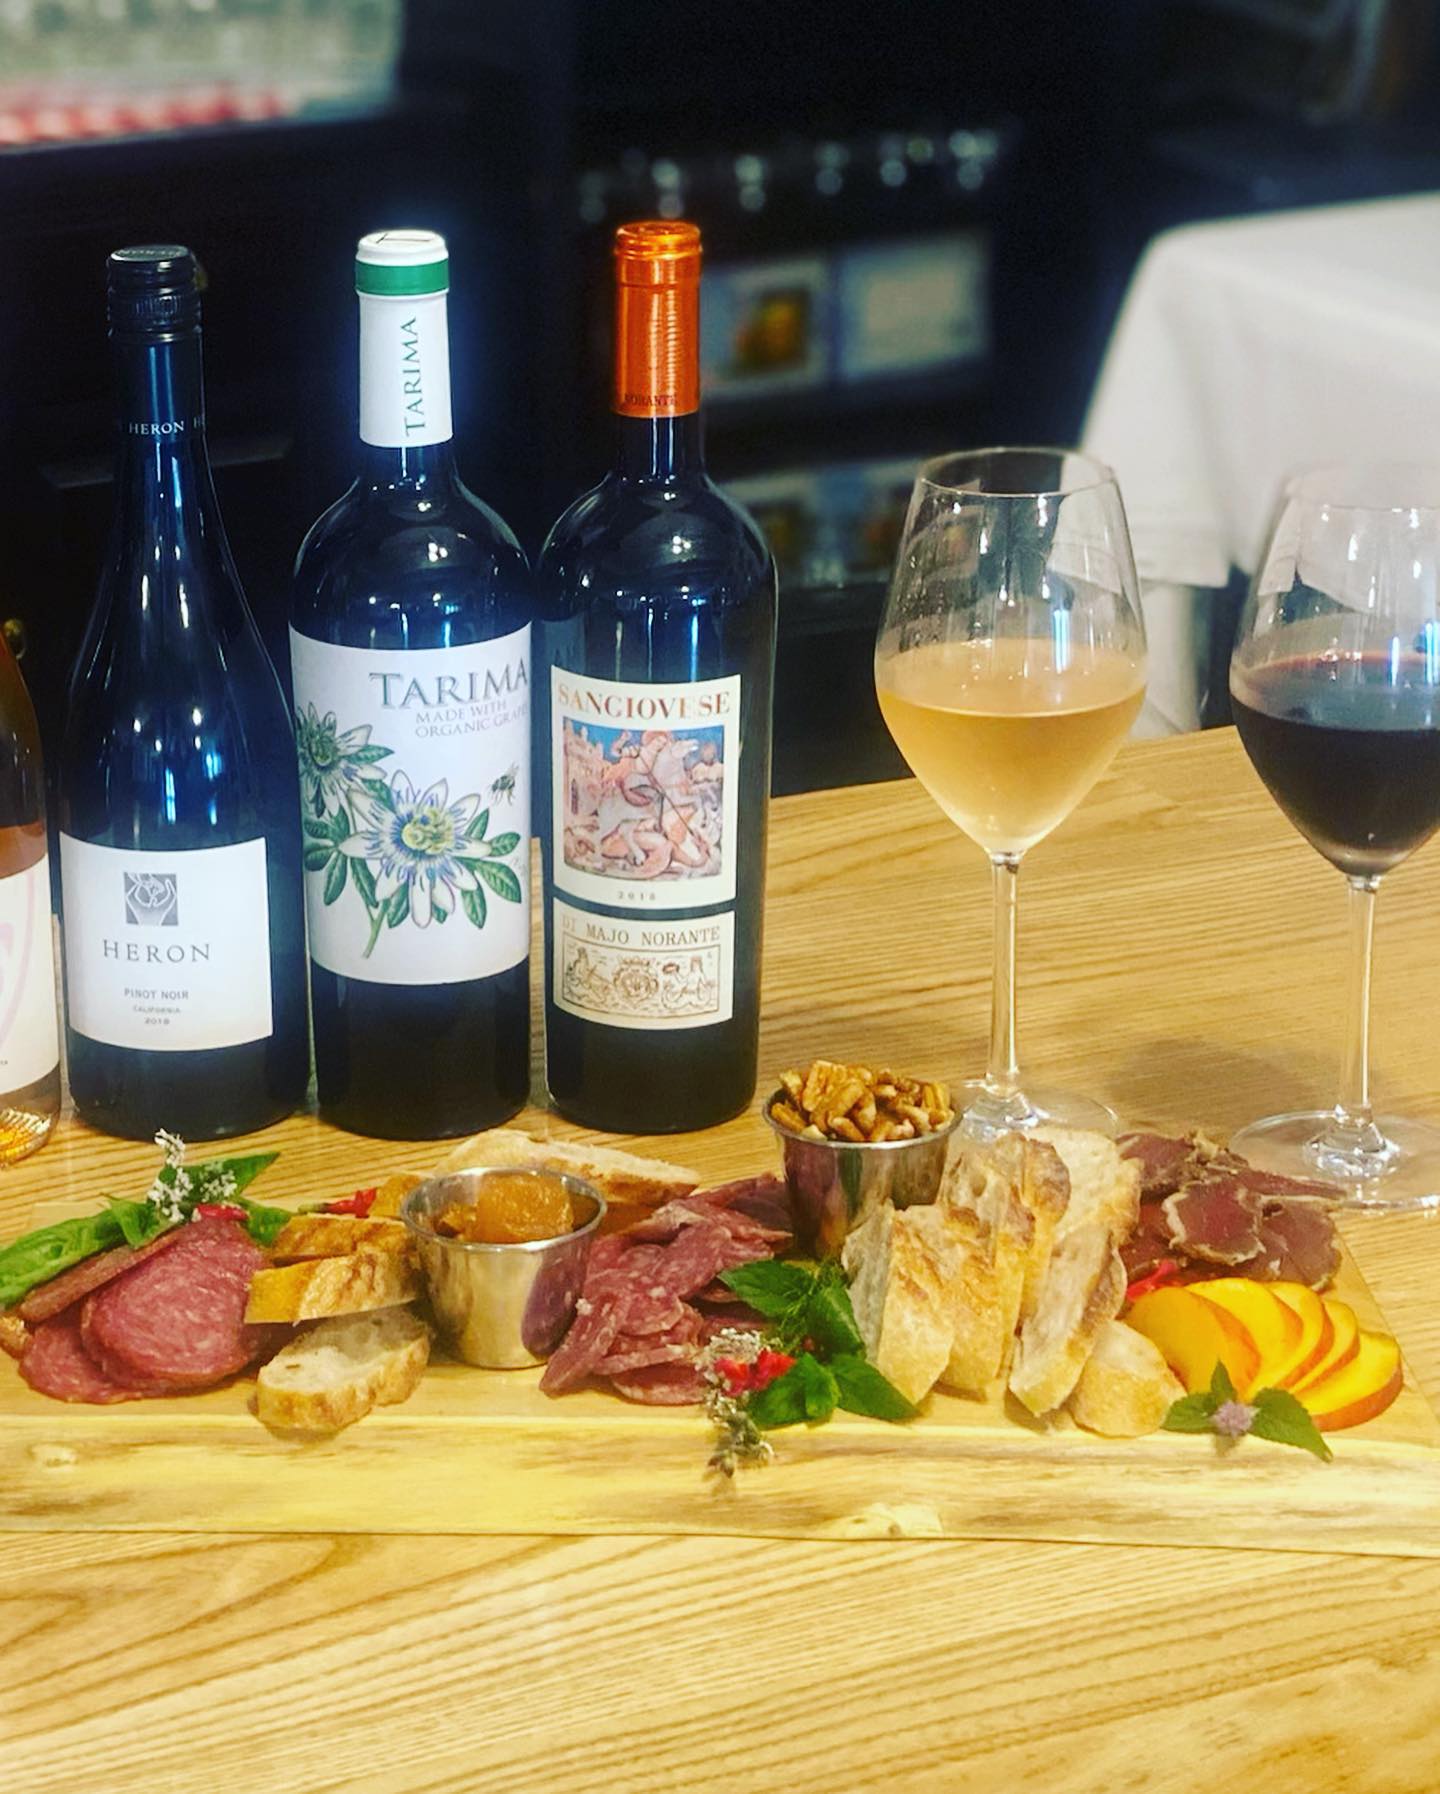 On a wooden table, there is a wooden board of charcuterie and three bottles of wine with two wine glasses behind it. Photo from Prairie Fruits Farm and Creamery's Facebook page.